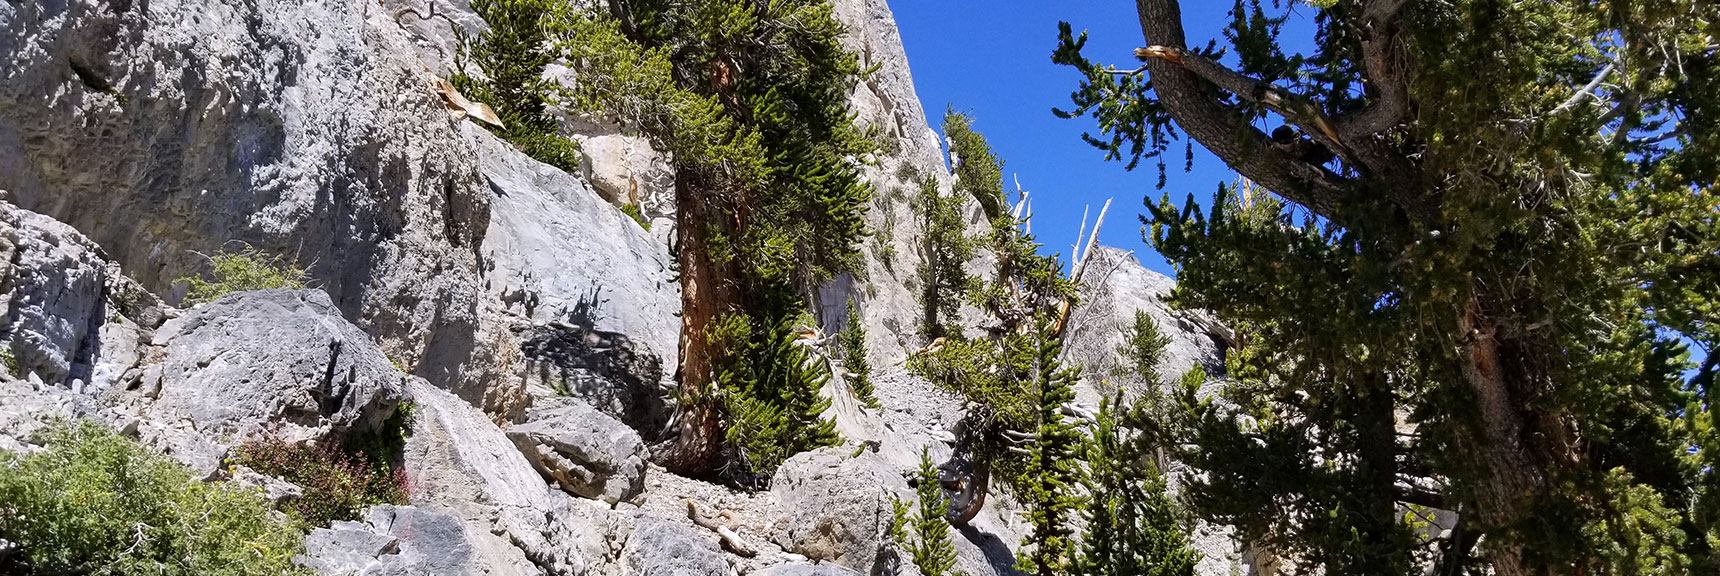 Looking Across At a Cliff Ledge to Climb on the Mummy Mt. East Approach in Mt. Charleston Wilderness, Nevada